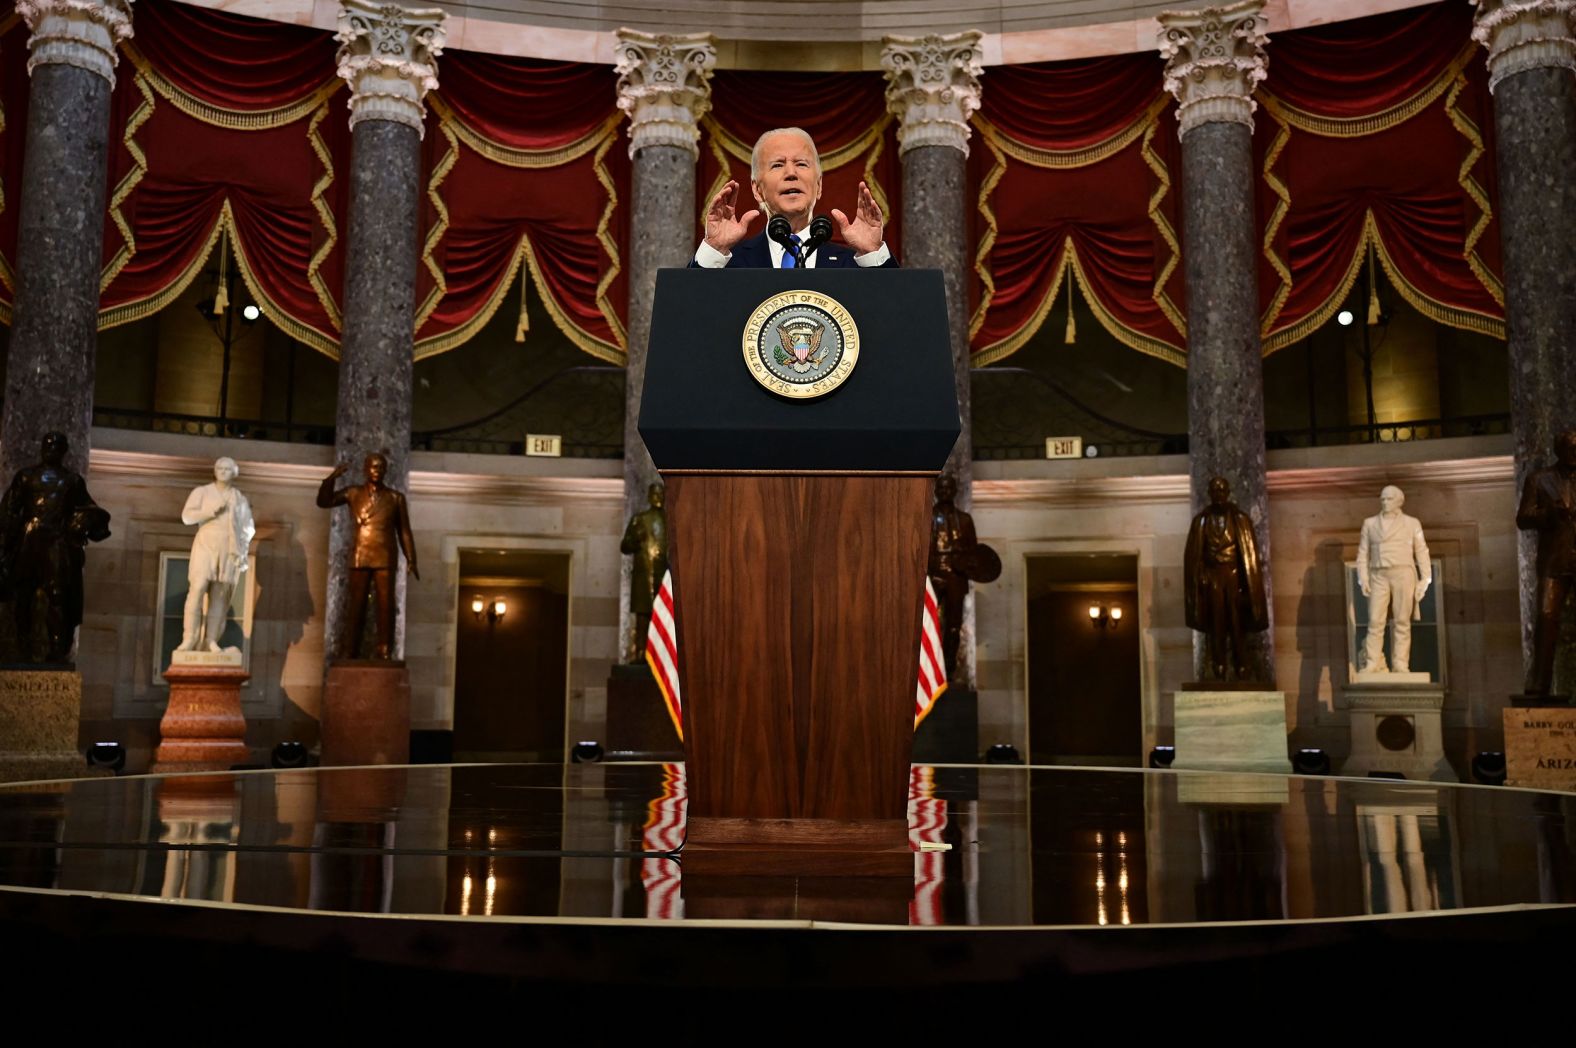 President Joe Biden speaks from the Capitol in January 2022 to mark the one-year anniversary of the <a href="https://www.cnn.com/2022/01/03/politics/gallery/january-6-capitol-insurrection/index.html" target="_blank">Capitol riot</a>. In his remarks, <a href="https://www.cnn.com/2022/01/06/politics/january-6-anniversary/index.html" target="_blank">Biden forcefully called out former President Donald Trump</a> for attempting to undo American democracy. "For the first time in our history, a president had not just lost an election. He tried to prevent the peaceful transfer of power as a violent mob reached the Capitol," Biden said. "But they failed. They failed. And on this day of remembrance, we must make sure that such an attack never, never happens again."